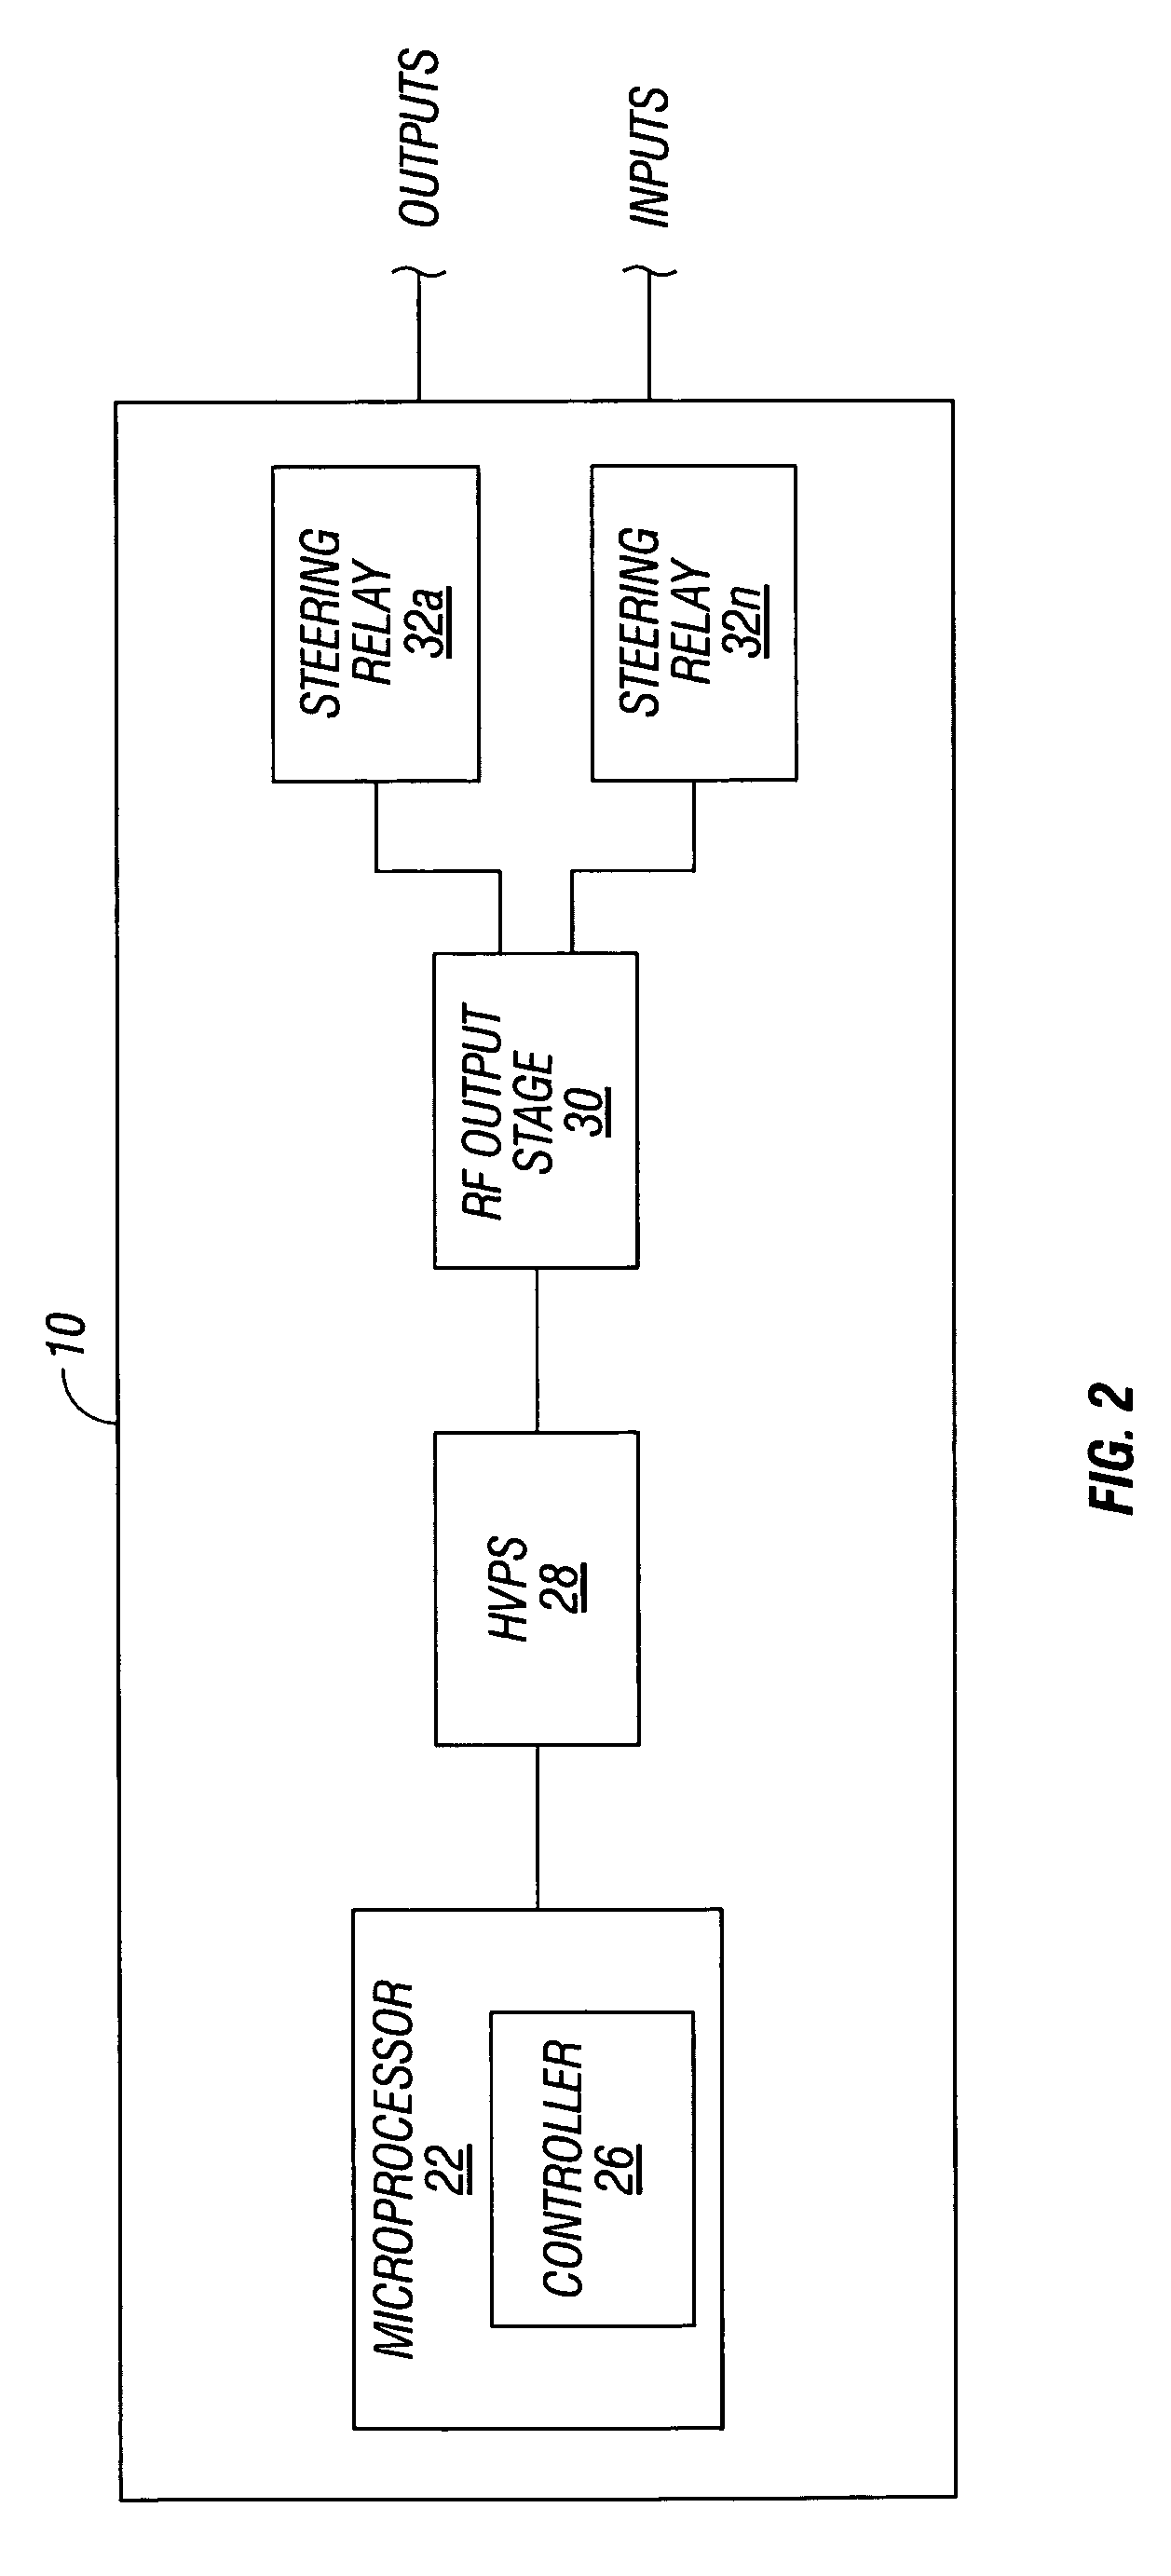 Dual synchro-resonant electrosurgical apparatus with bi-directional magnetic coupling